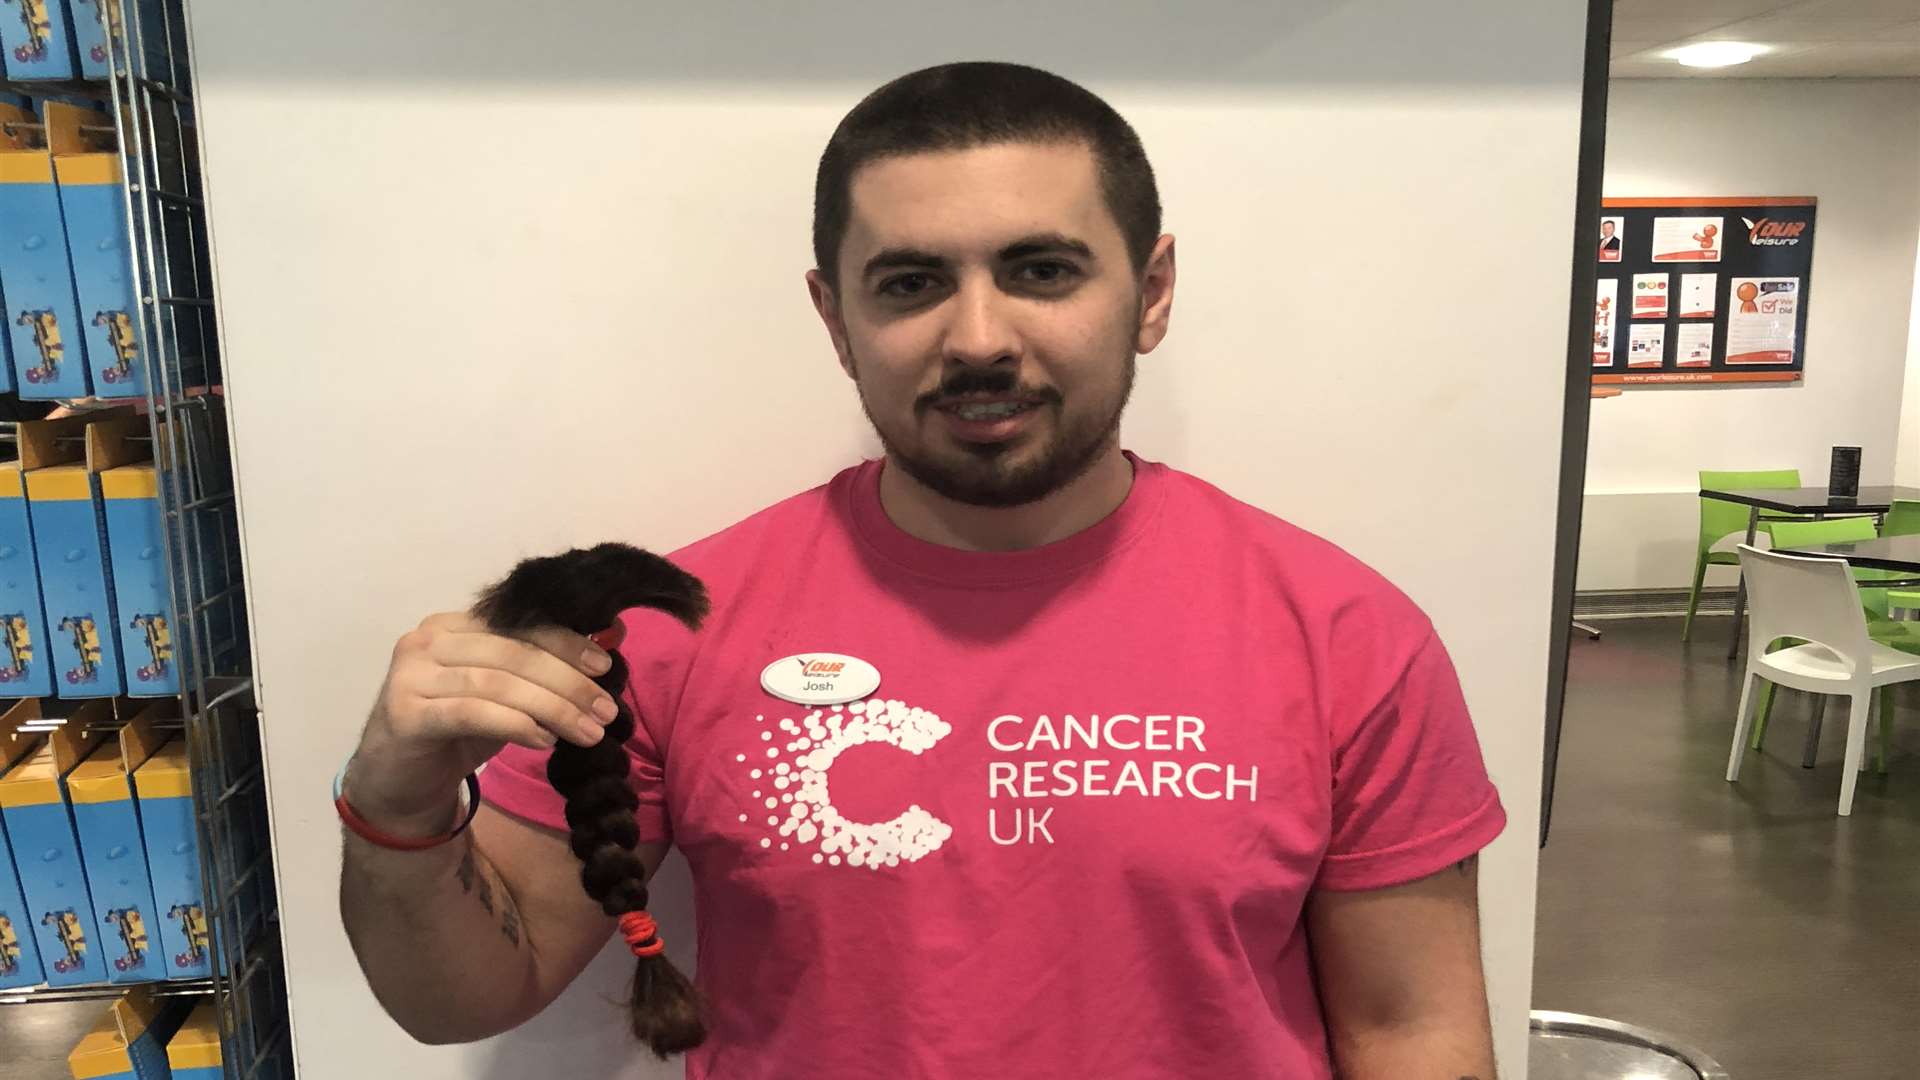 He hopes to raise £500 for Cancer Research UK